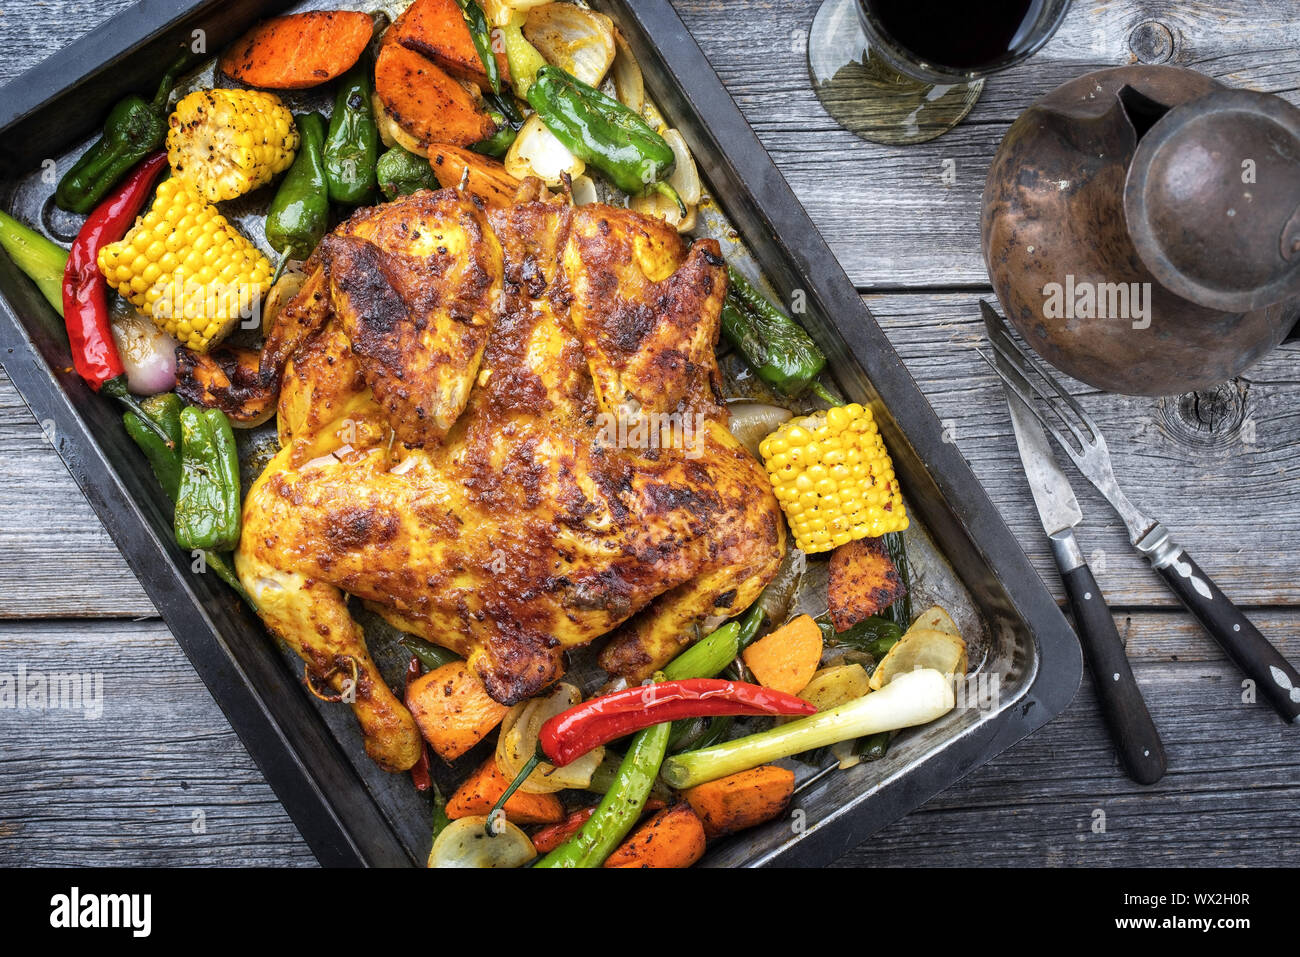 Spatchcocked barbecue chicken al mattone chili with corn and vegetable as top view on an old metal sheet Stock Photo